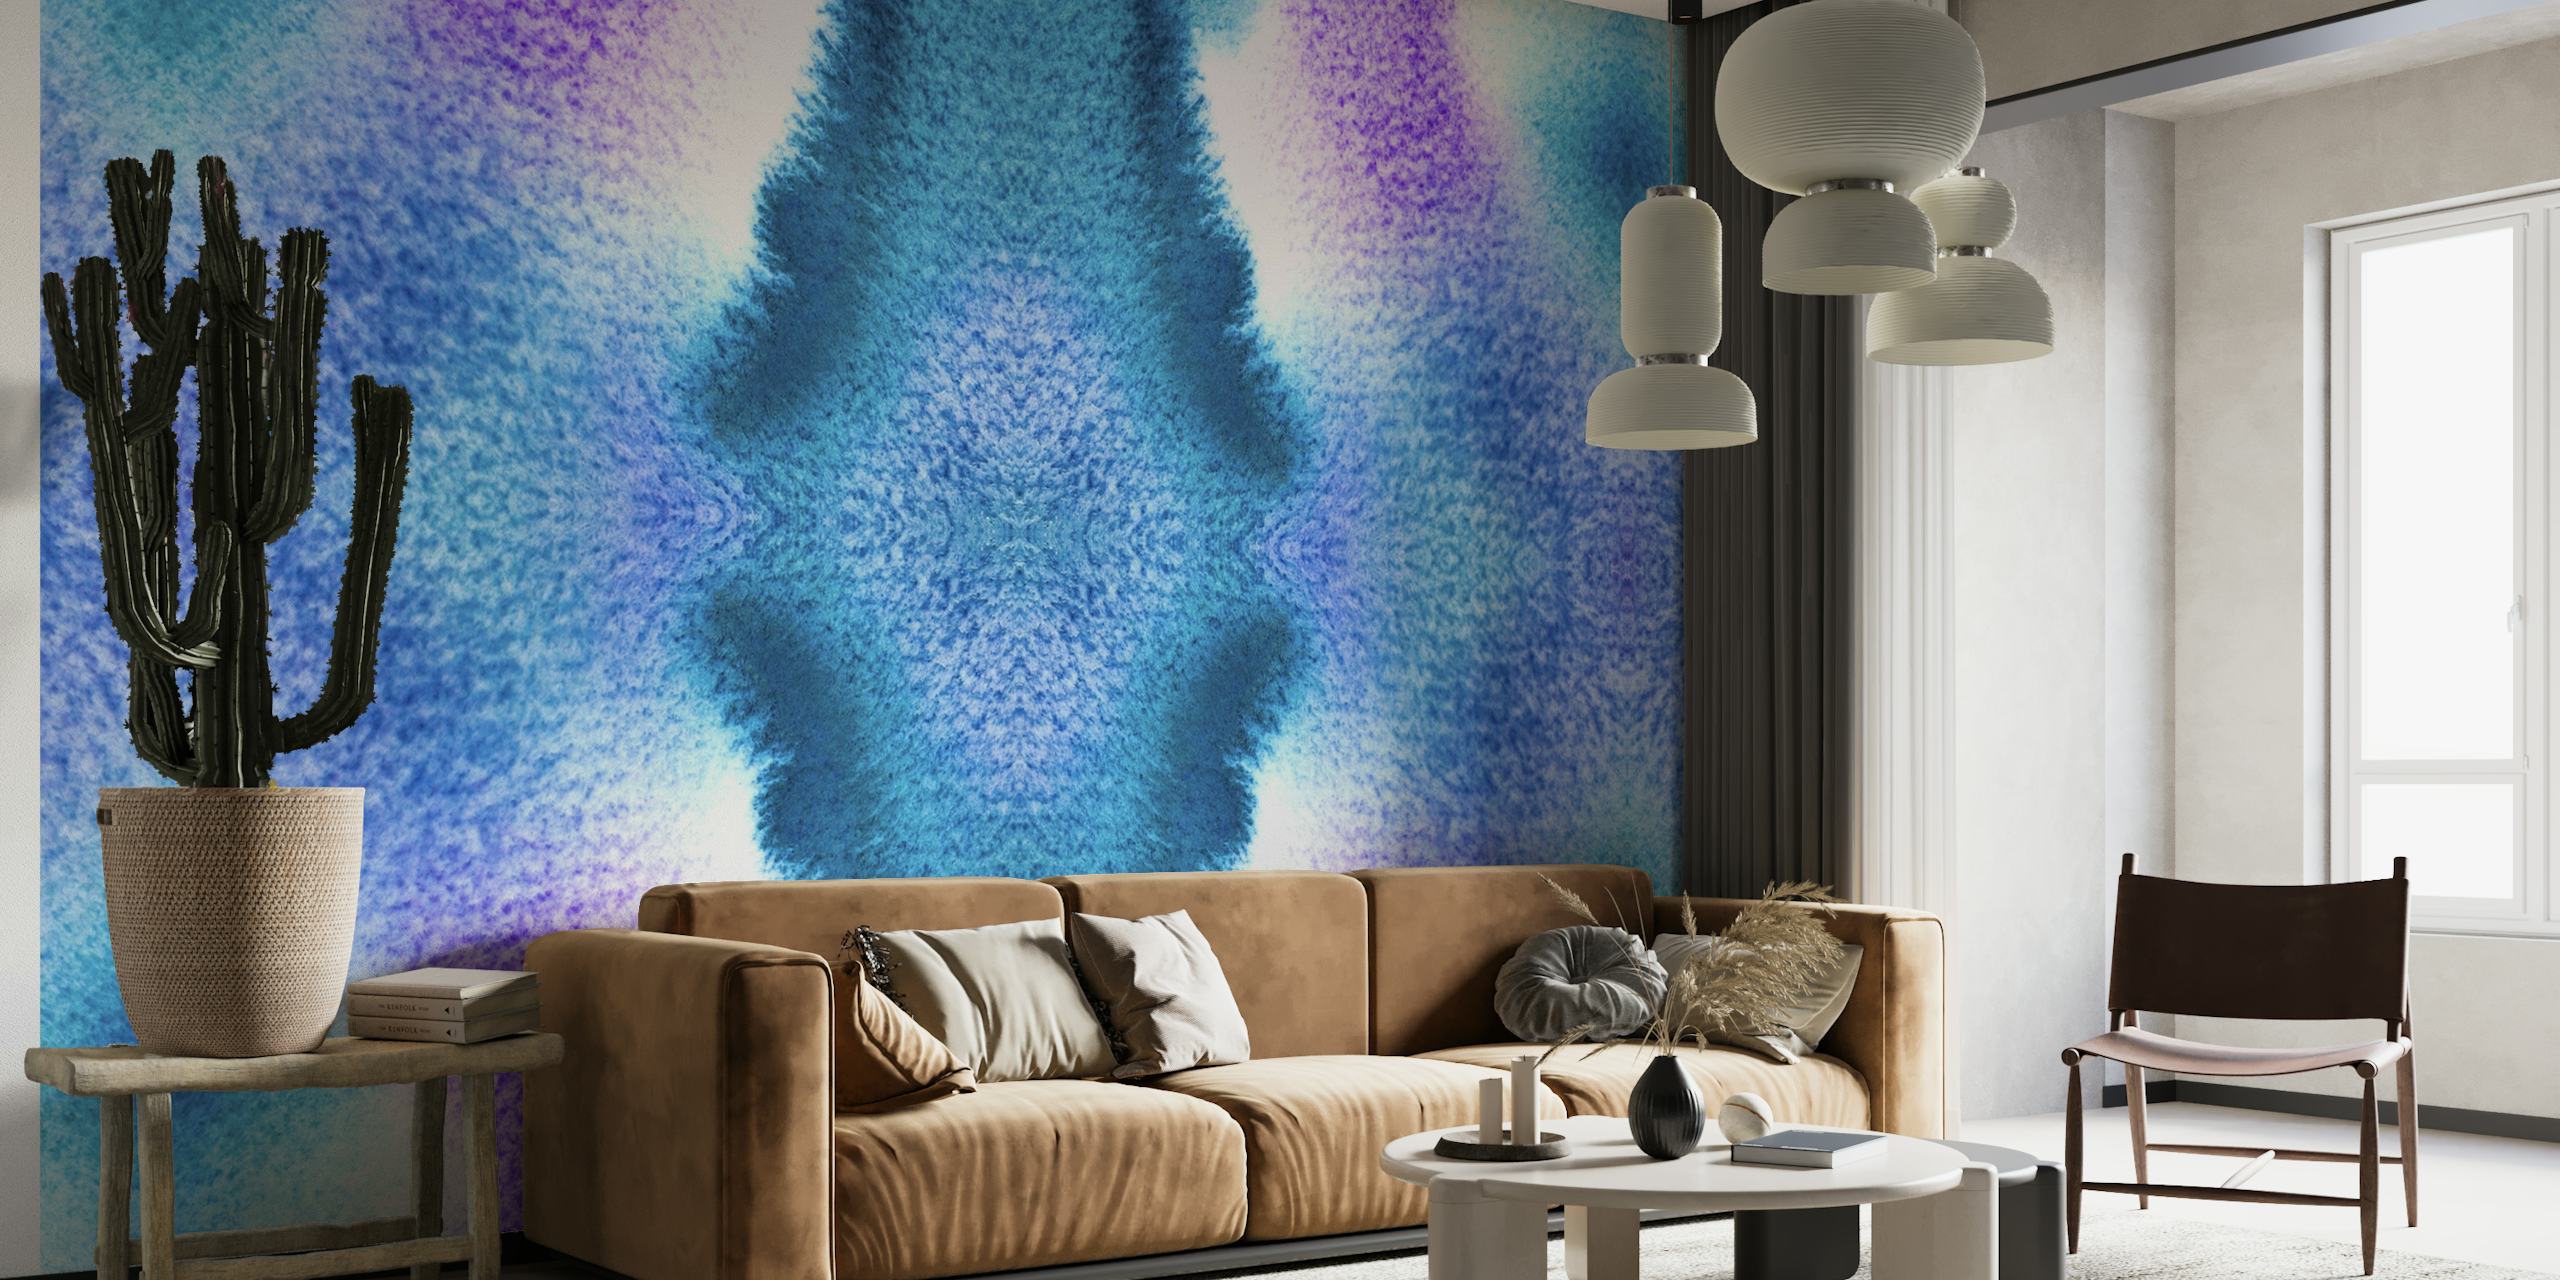 Tie dye pattern in turquoise and purple hues wall mural